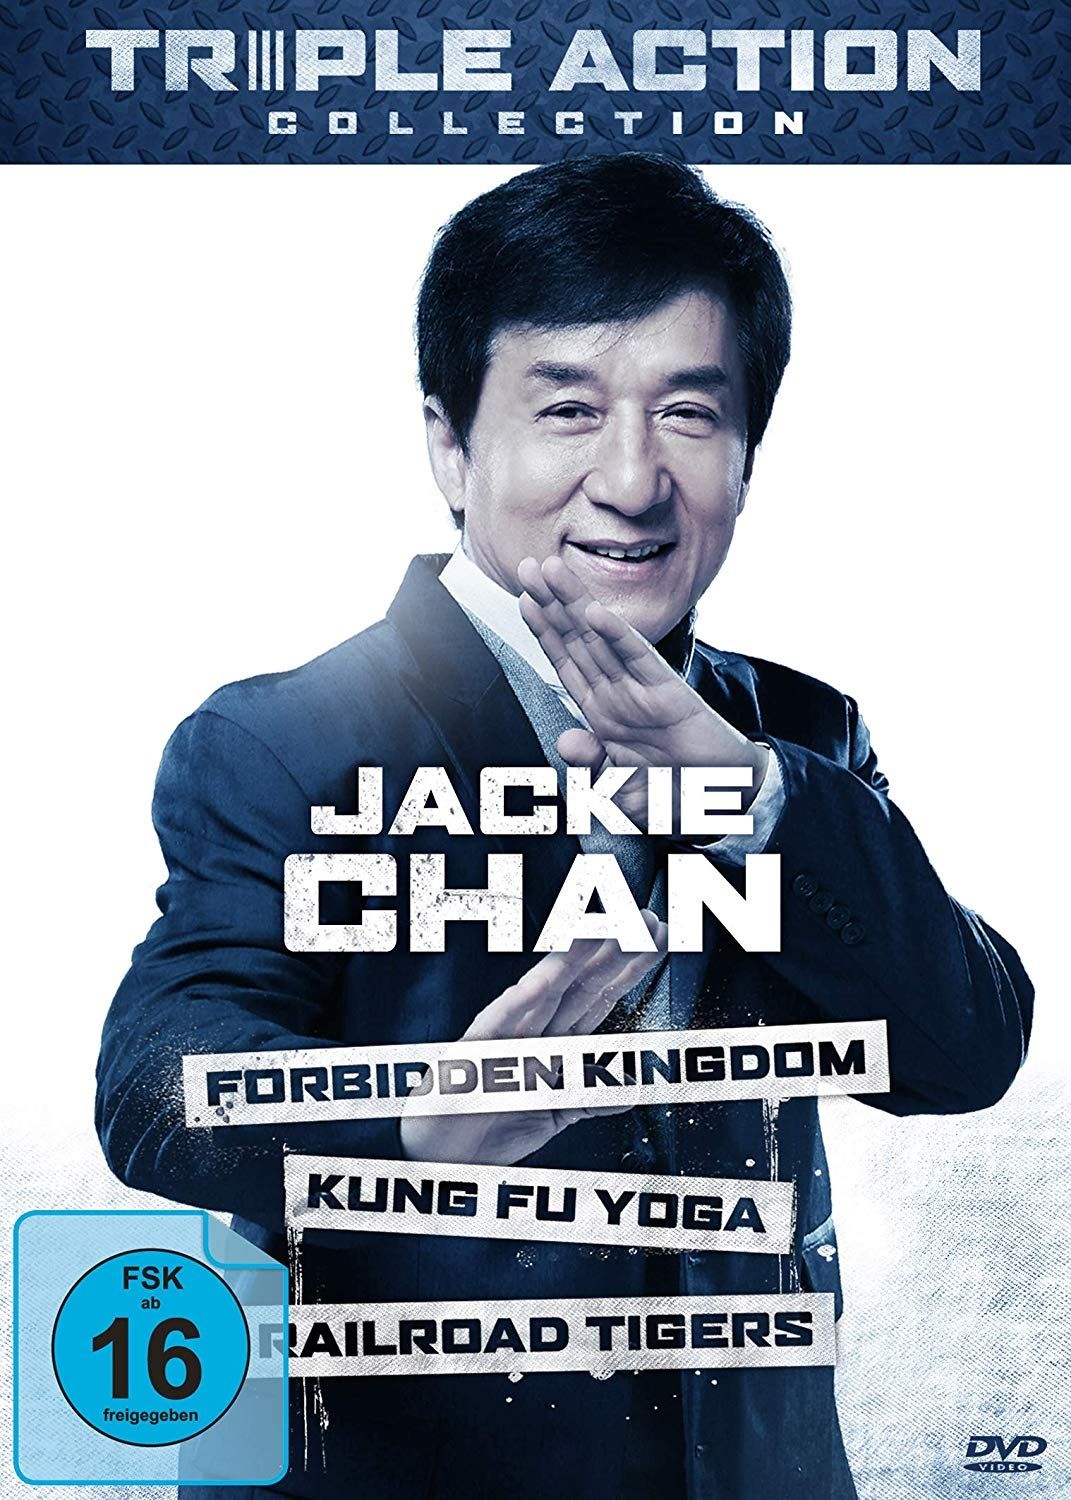 Forbidden Kingdom / Kung Fu Yoga / Railroad Tigers (Jackie Chan Triple Action Collection) (3 Discs)